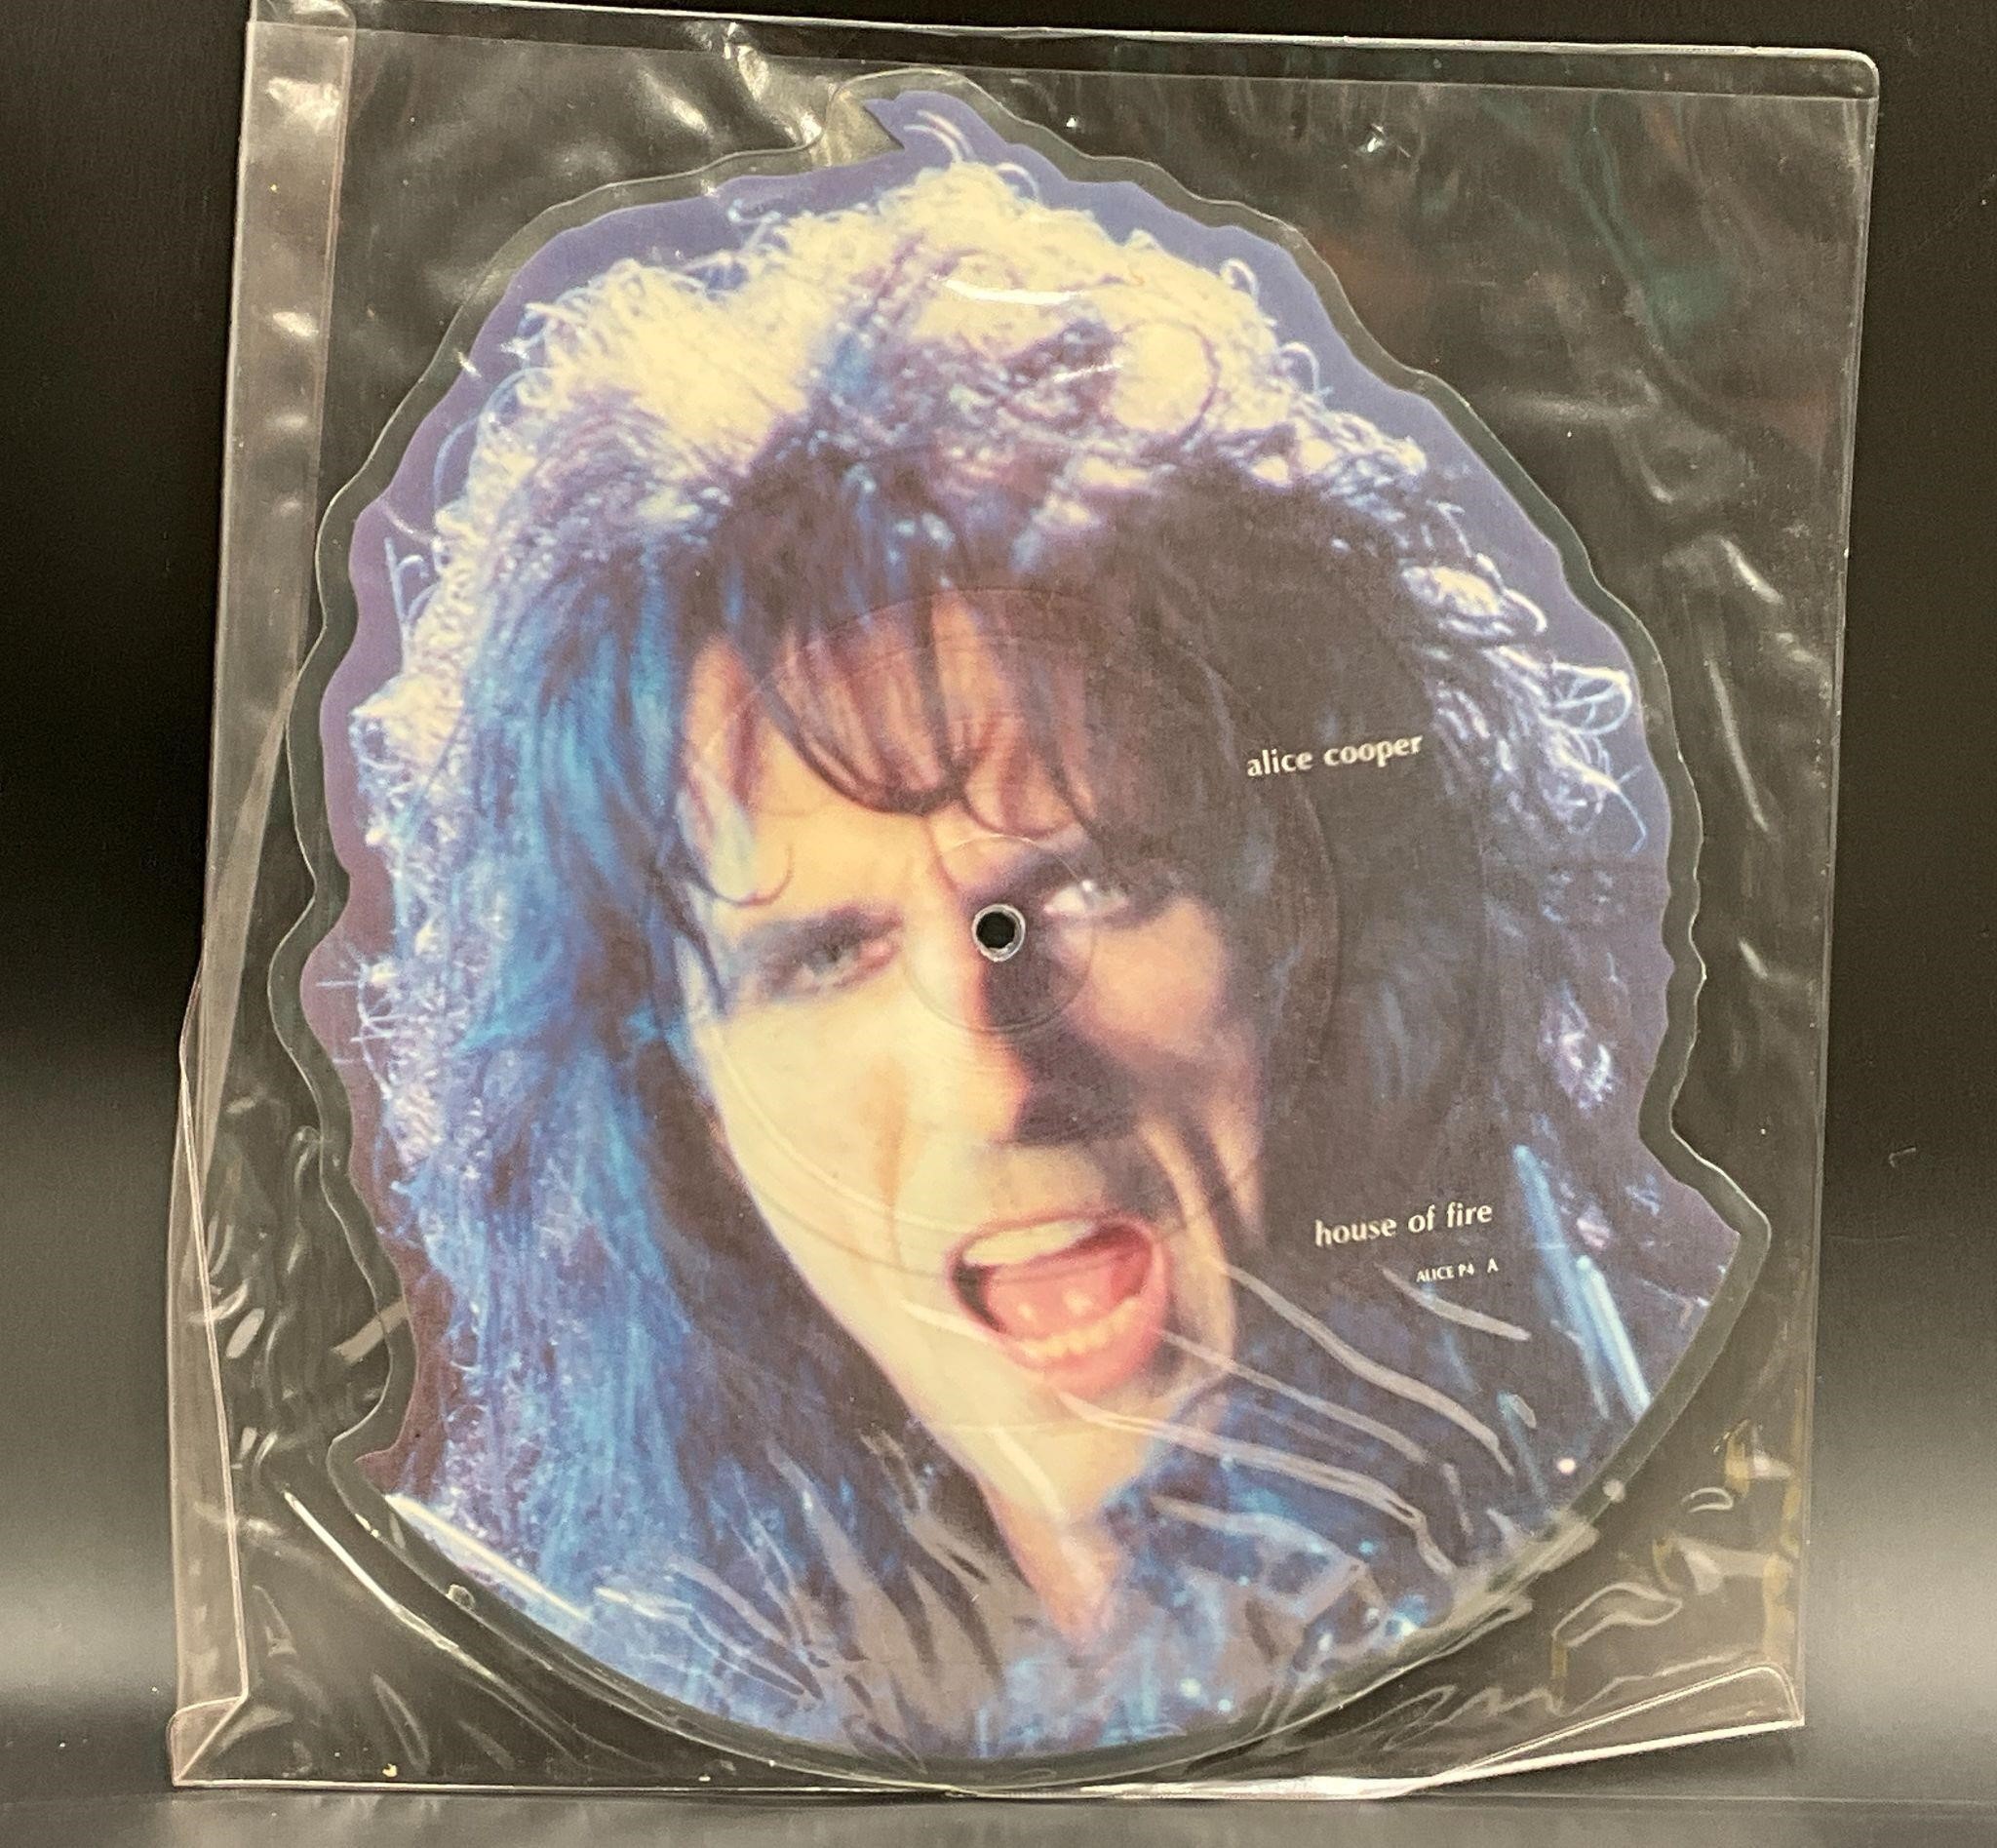 1989 Alice Cooper "House Of Fire" 7" Picture Disc